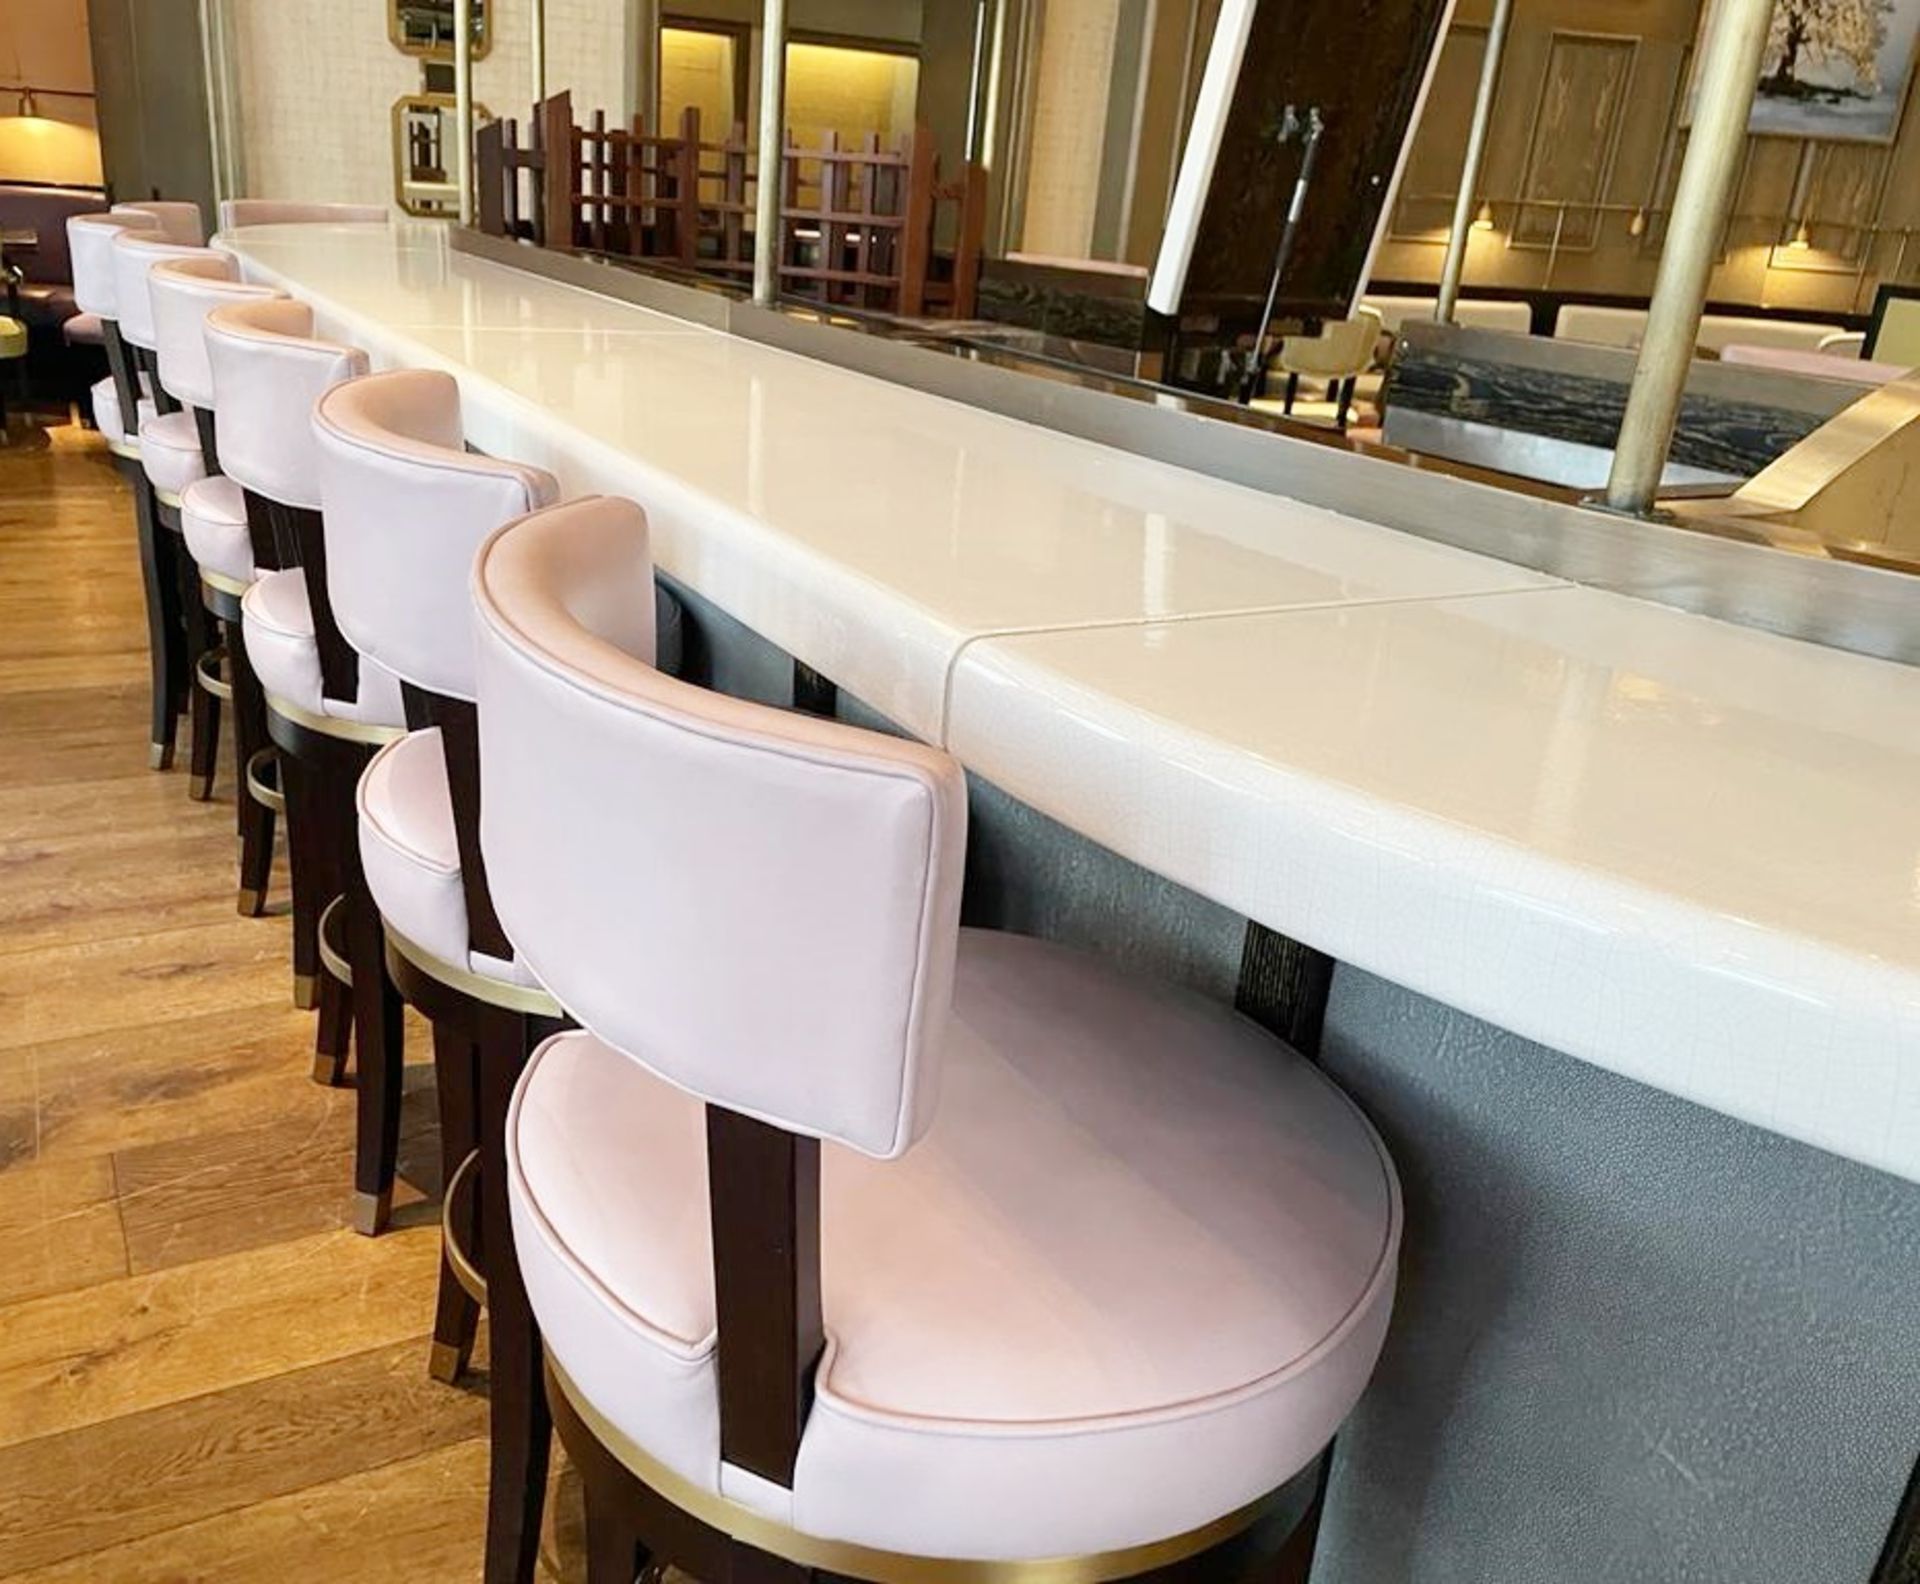 1 x Luxury Curved Restaurant 5.5-Metre Centrepiece Bar, Clad in Timber & Leather with 18 x Stools - Image 33 of 72